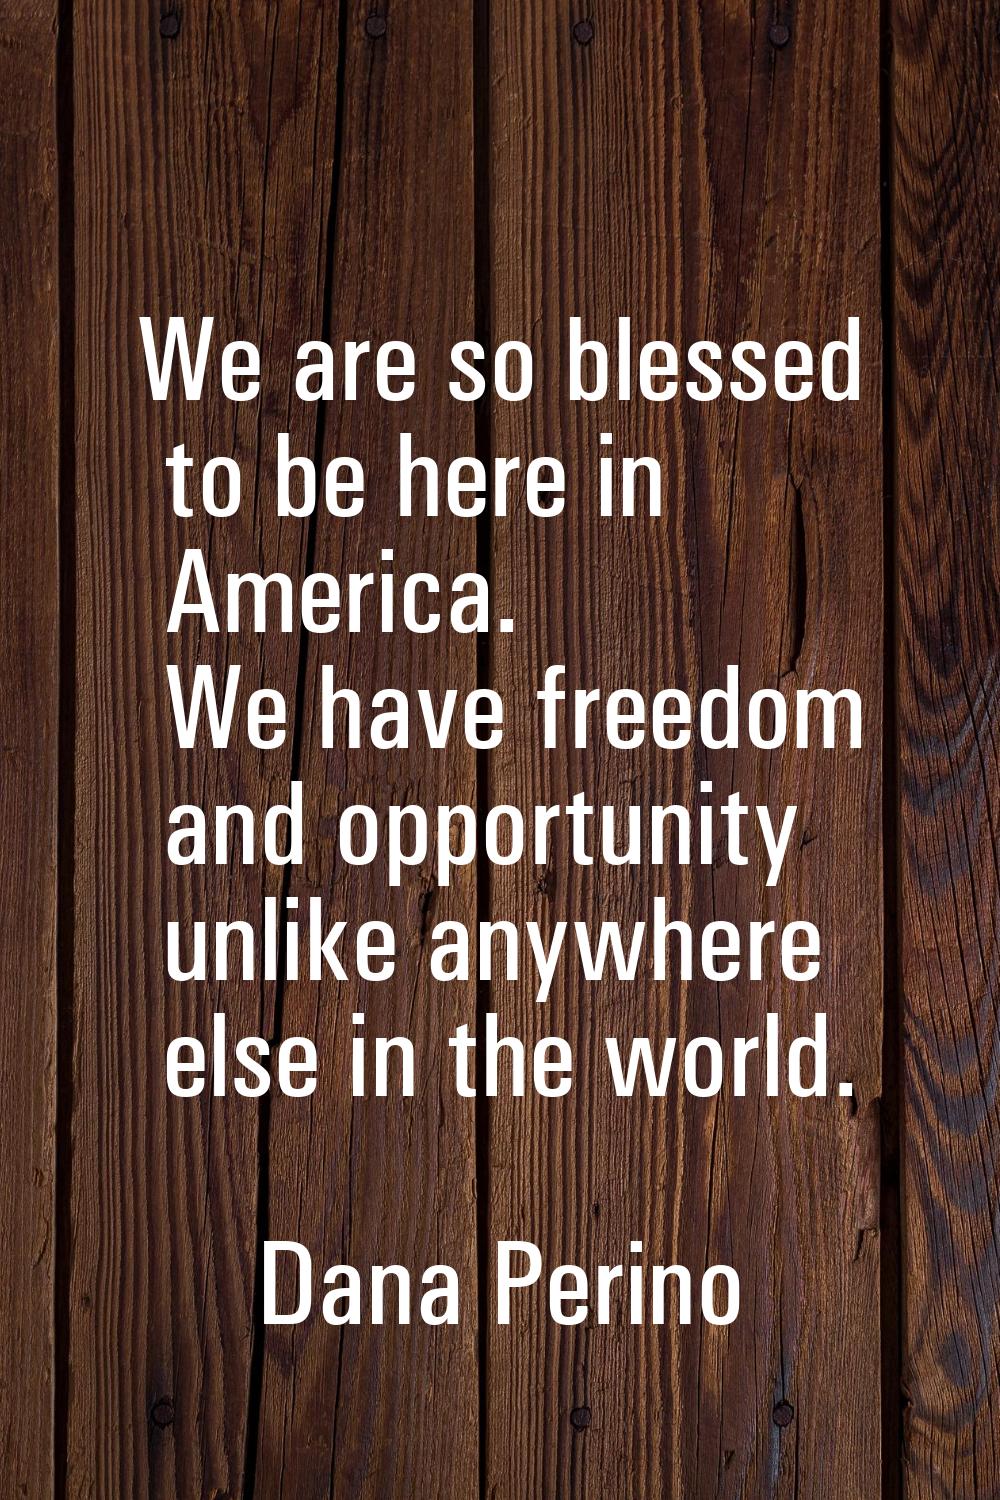 We are so blessed to be here in America. We have freedom and opportunity unlike anywhere else in th